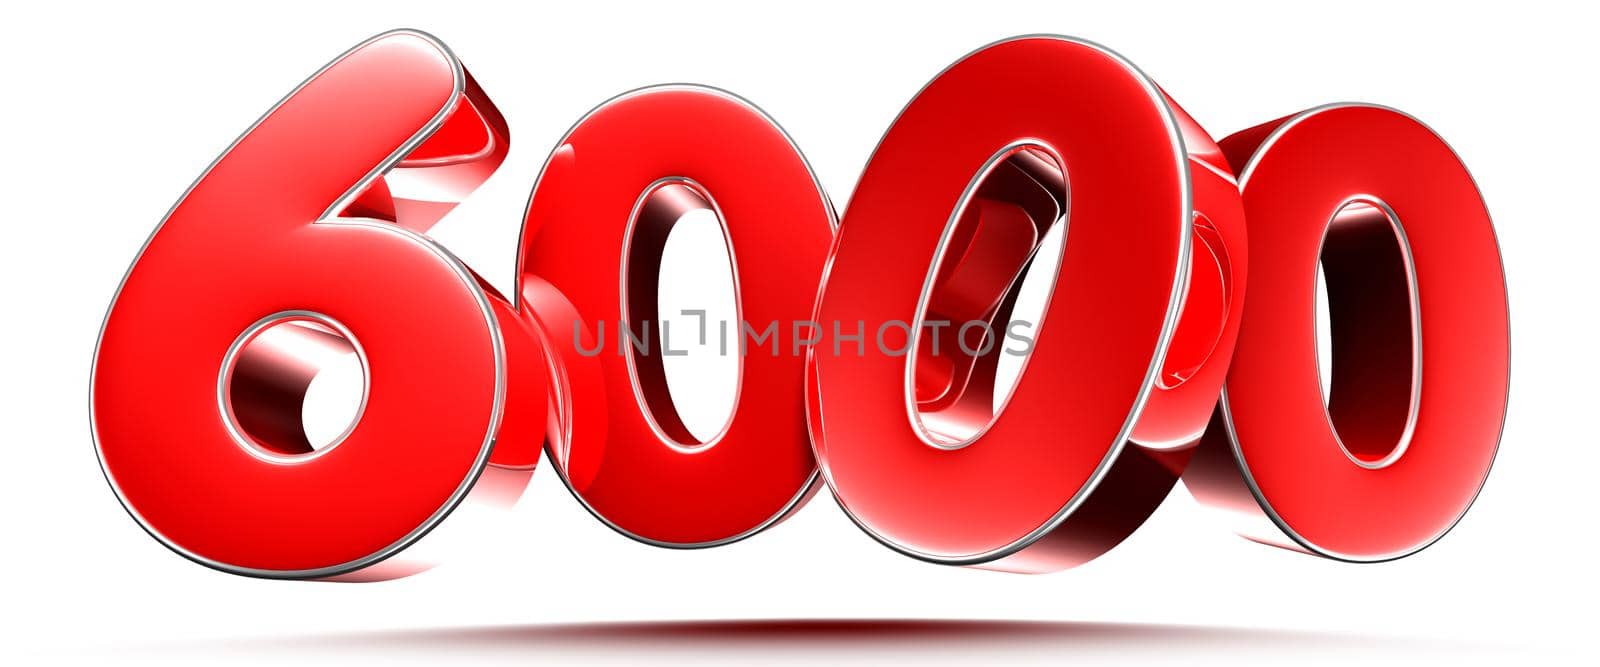 Rounded red numbers 6000 on white background 3D illustration with clipping path by thitimontoyai